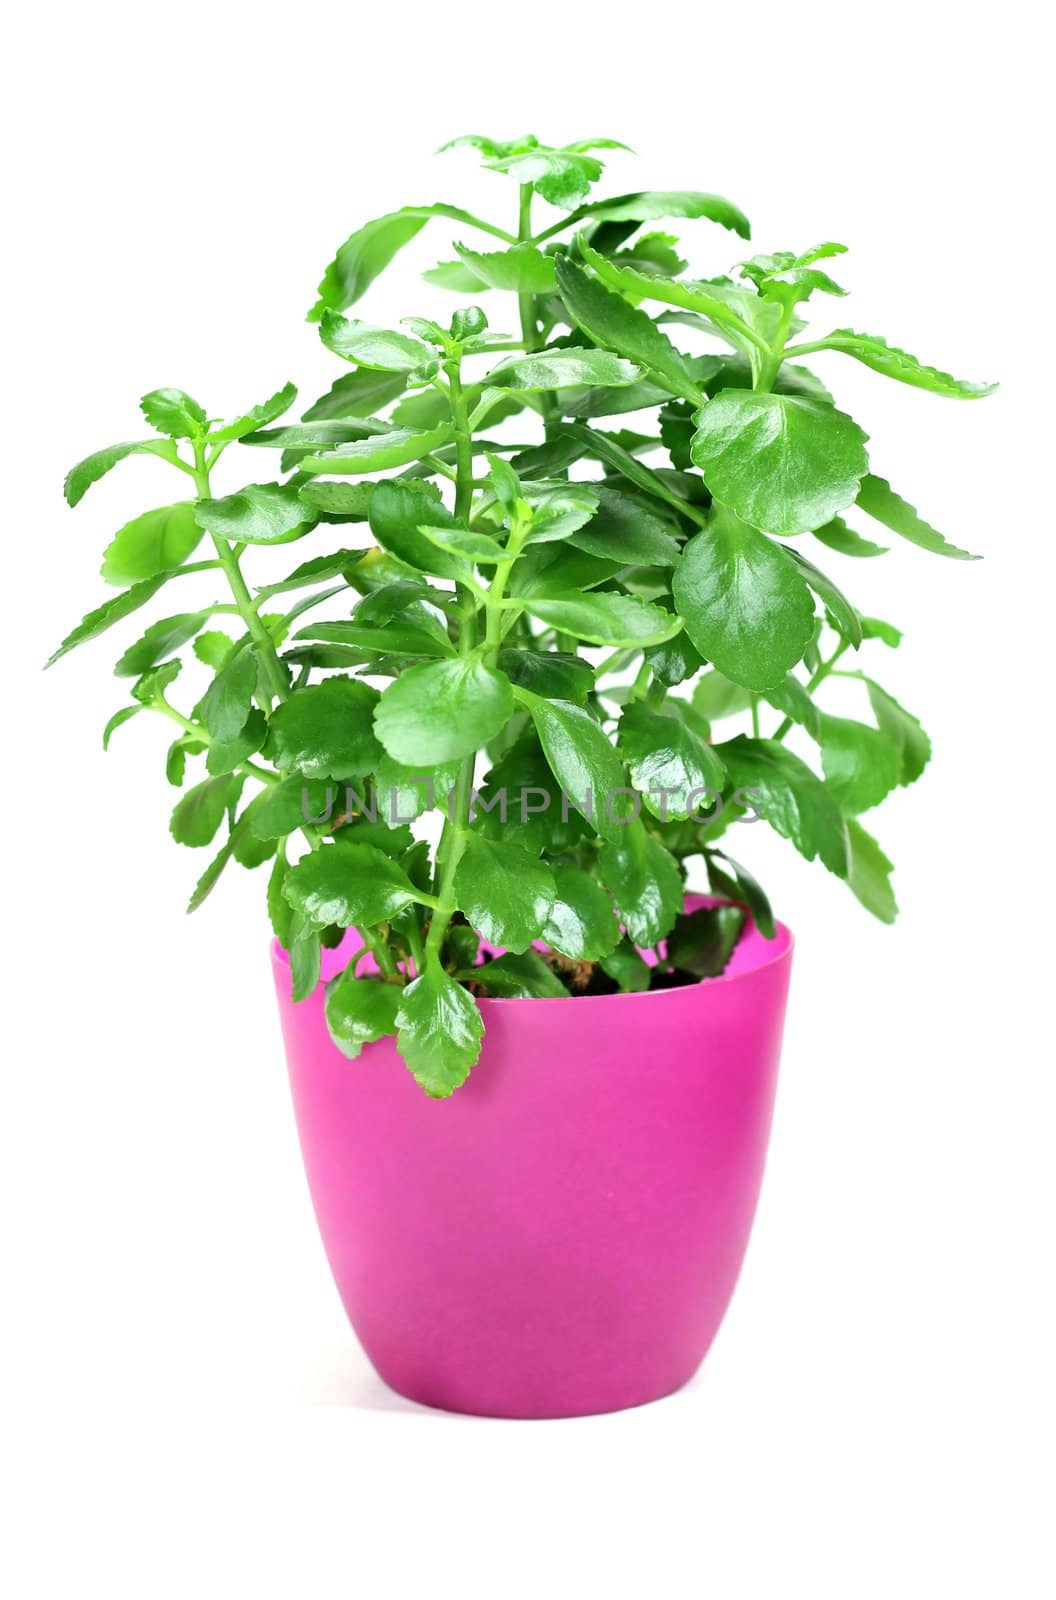 Green home plant in pink flower pot on white background 